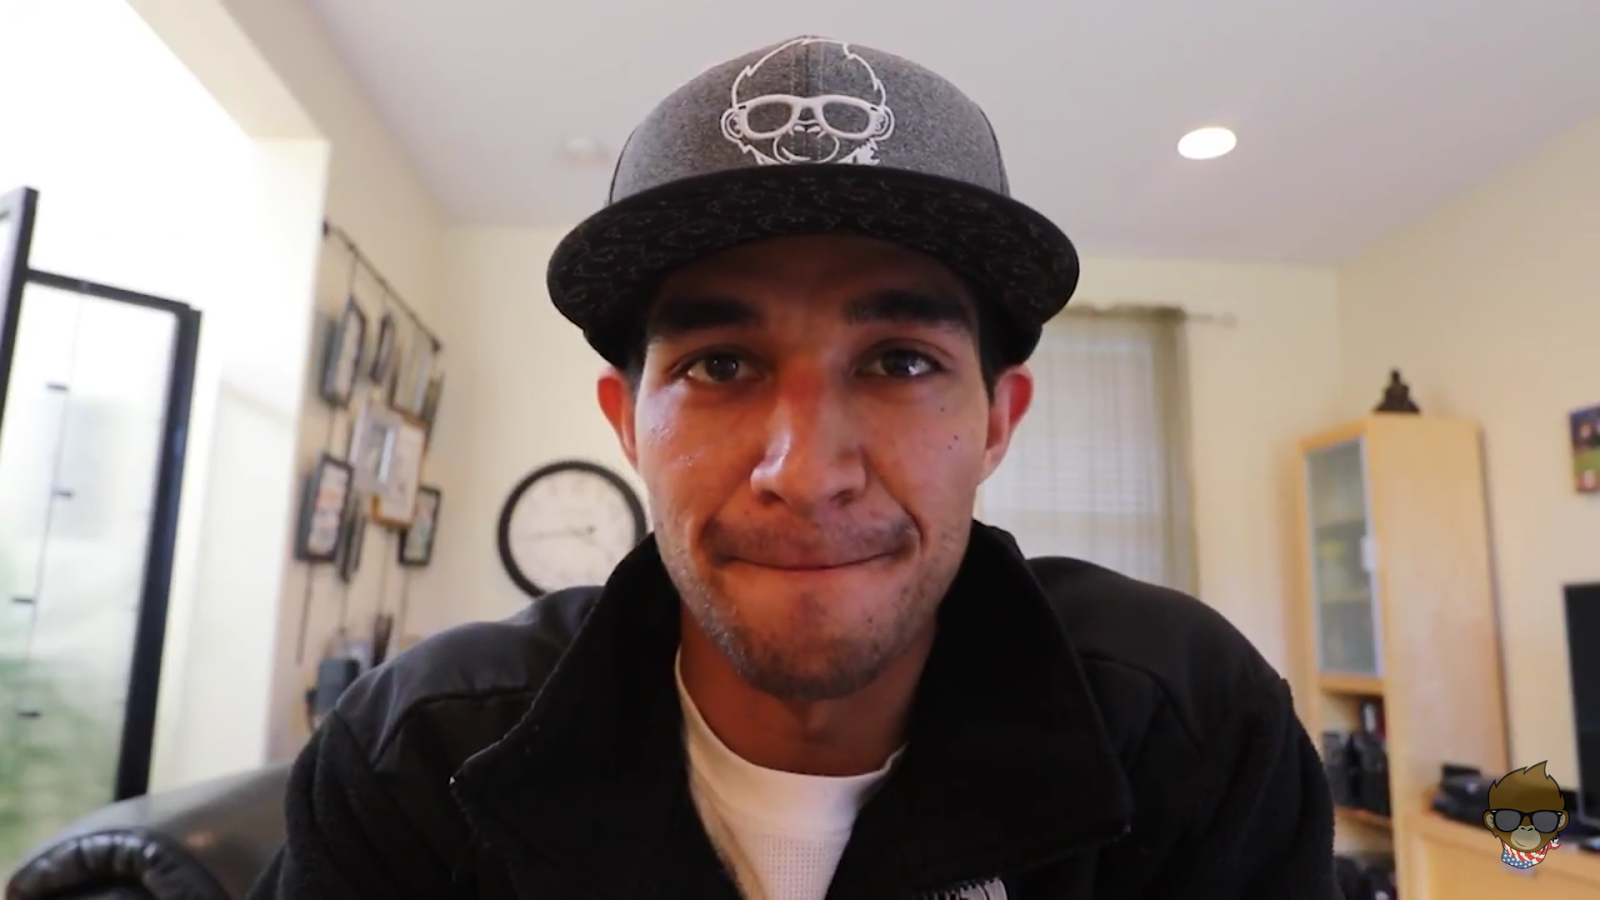 Wil Dasovich reveals in his vlog: 